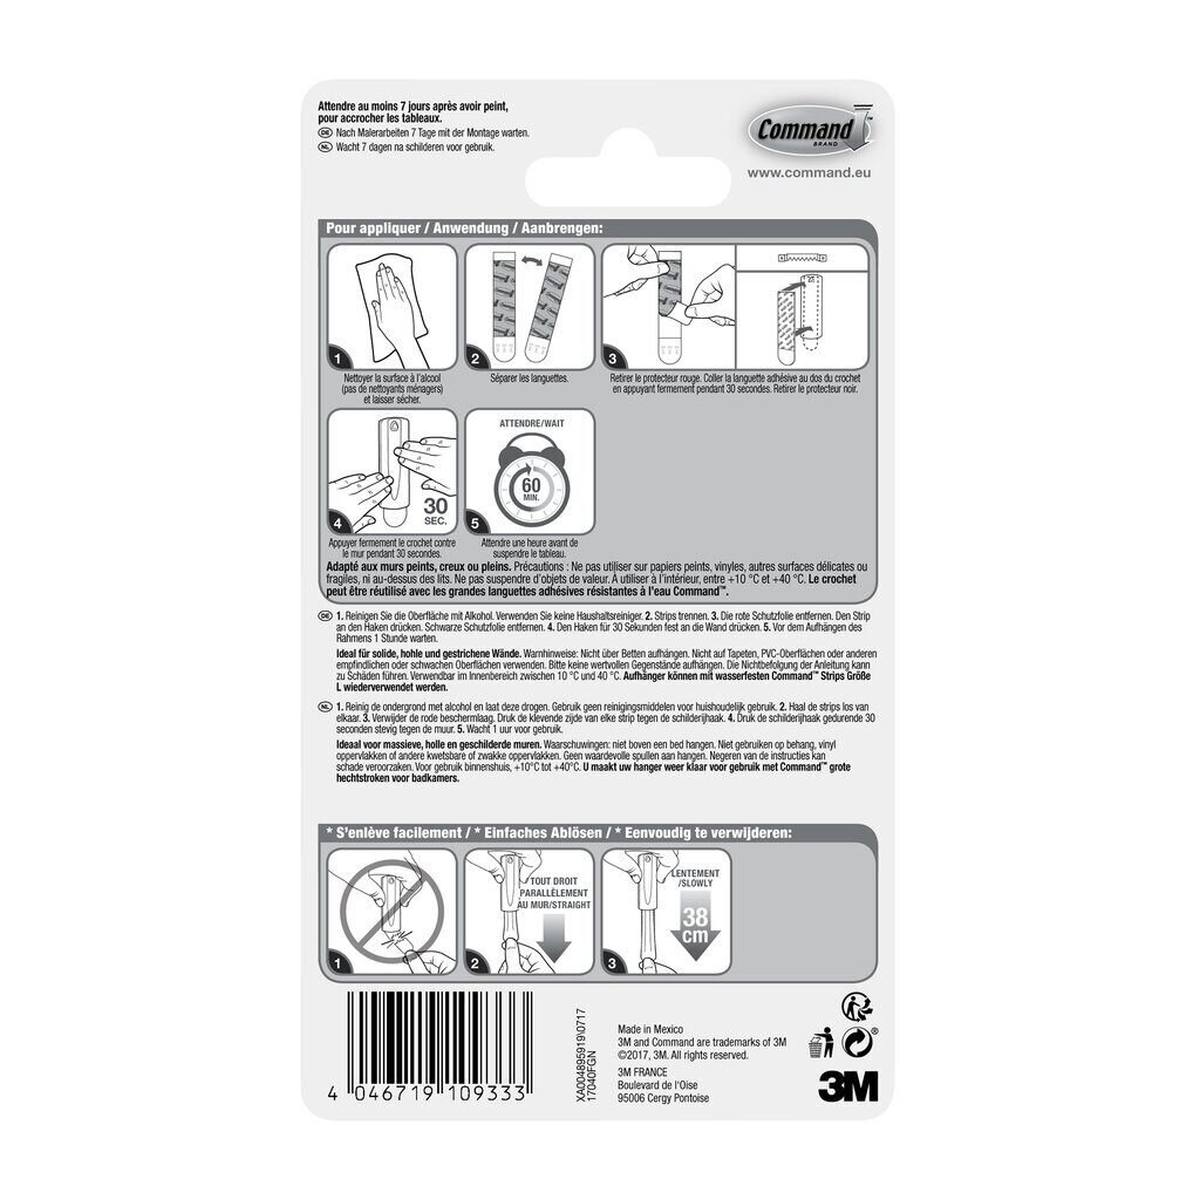 3M Command picture nail L, 1 plastic hook, load capacity up to 2.3 kg 2 white Command Strips in size L